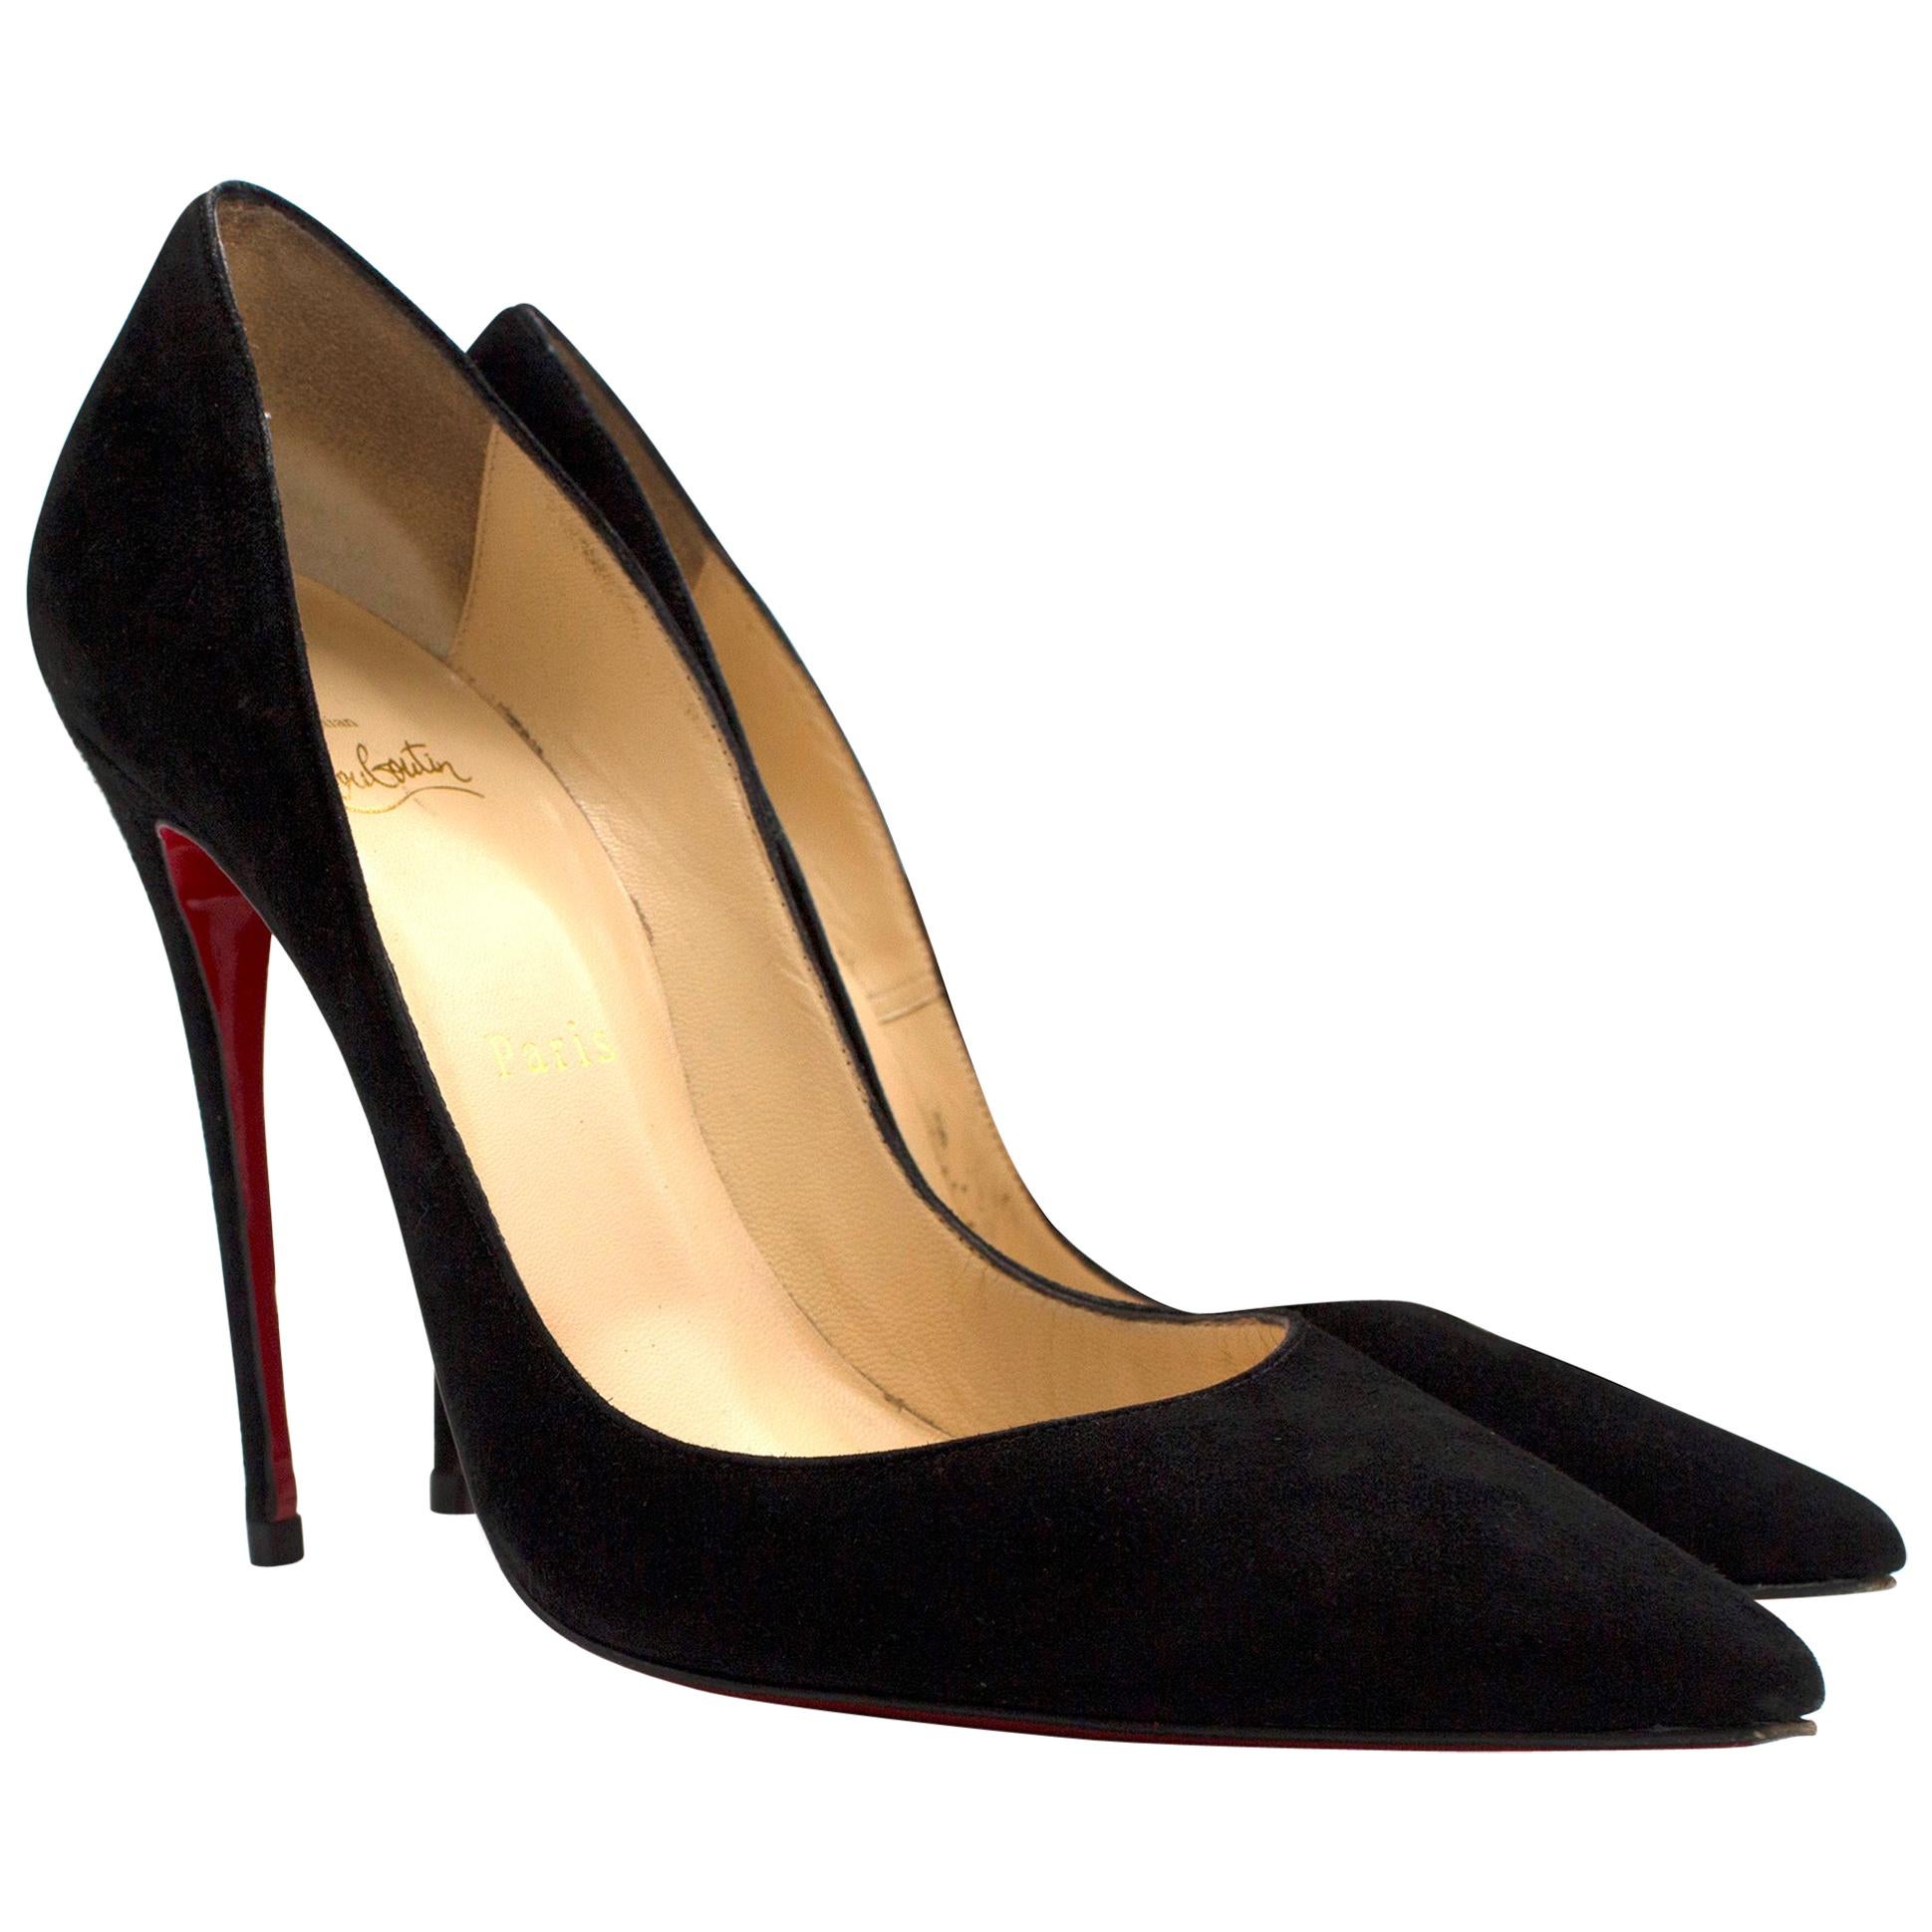 Christian Louboutin So Kate 120mm suede pumps US 8 im Angebot